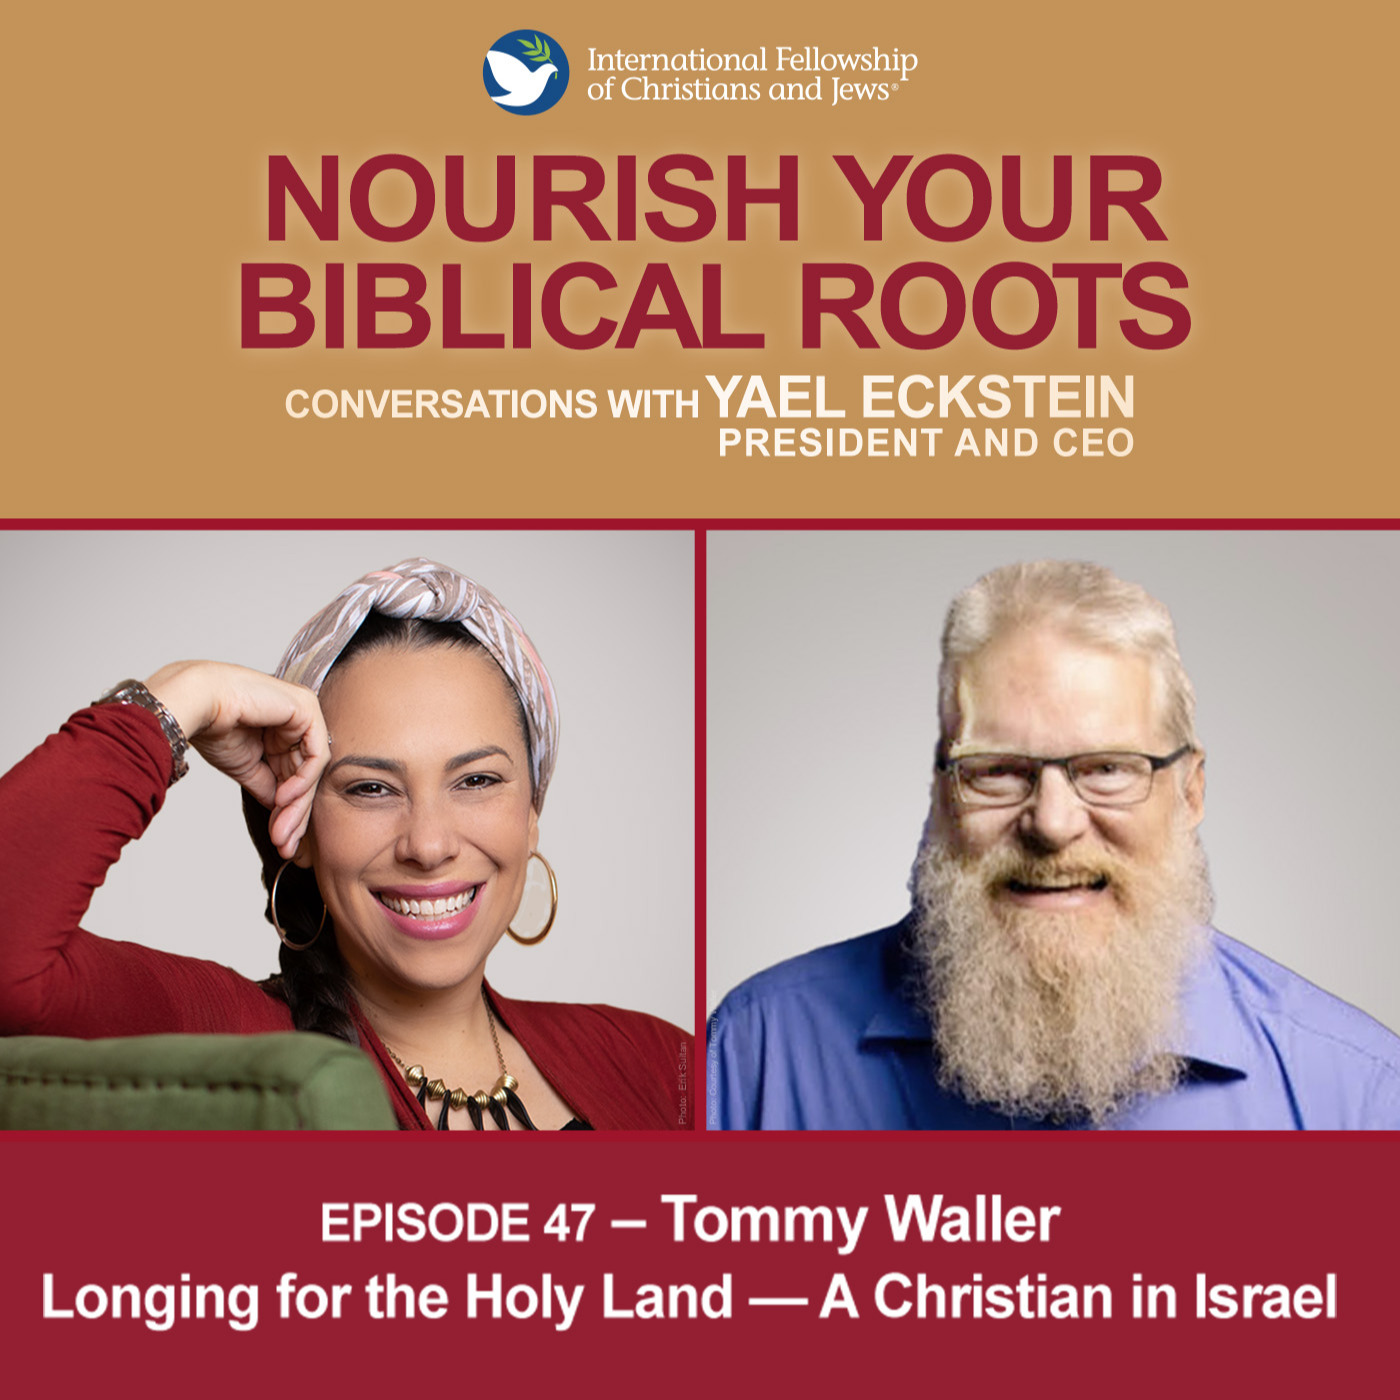 Longing for the Holy Land — A Christian in Israel